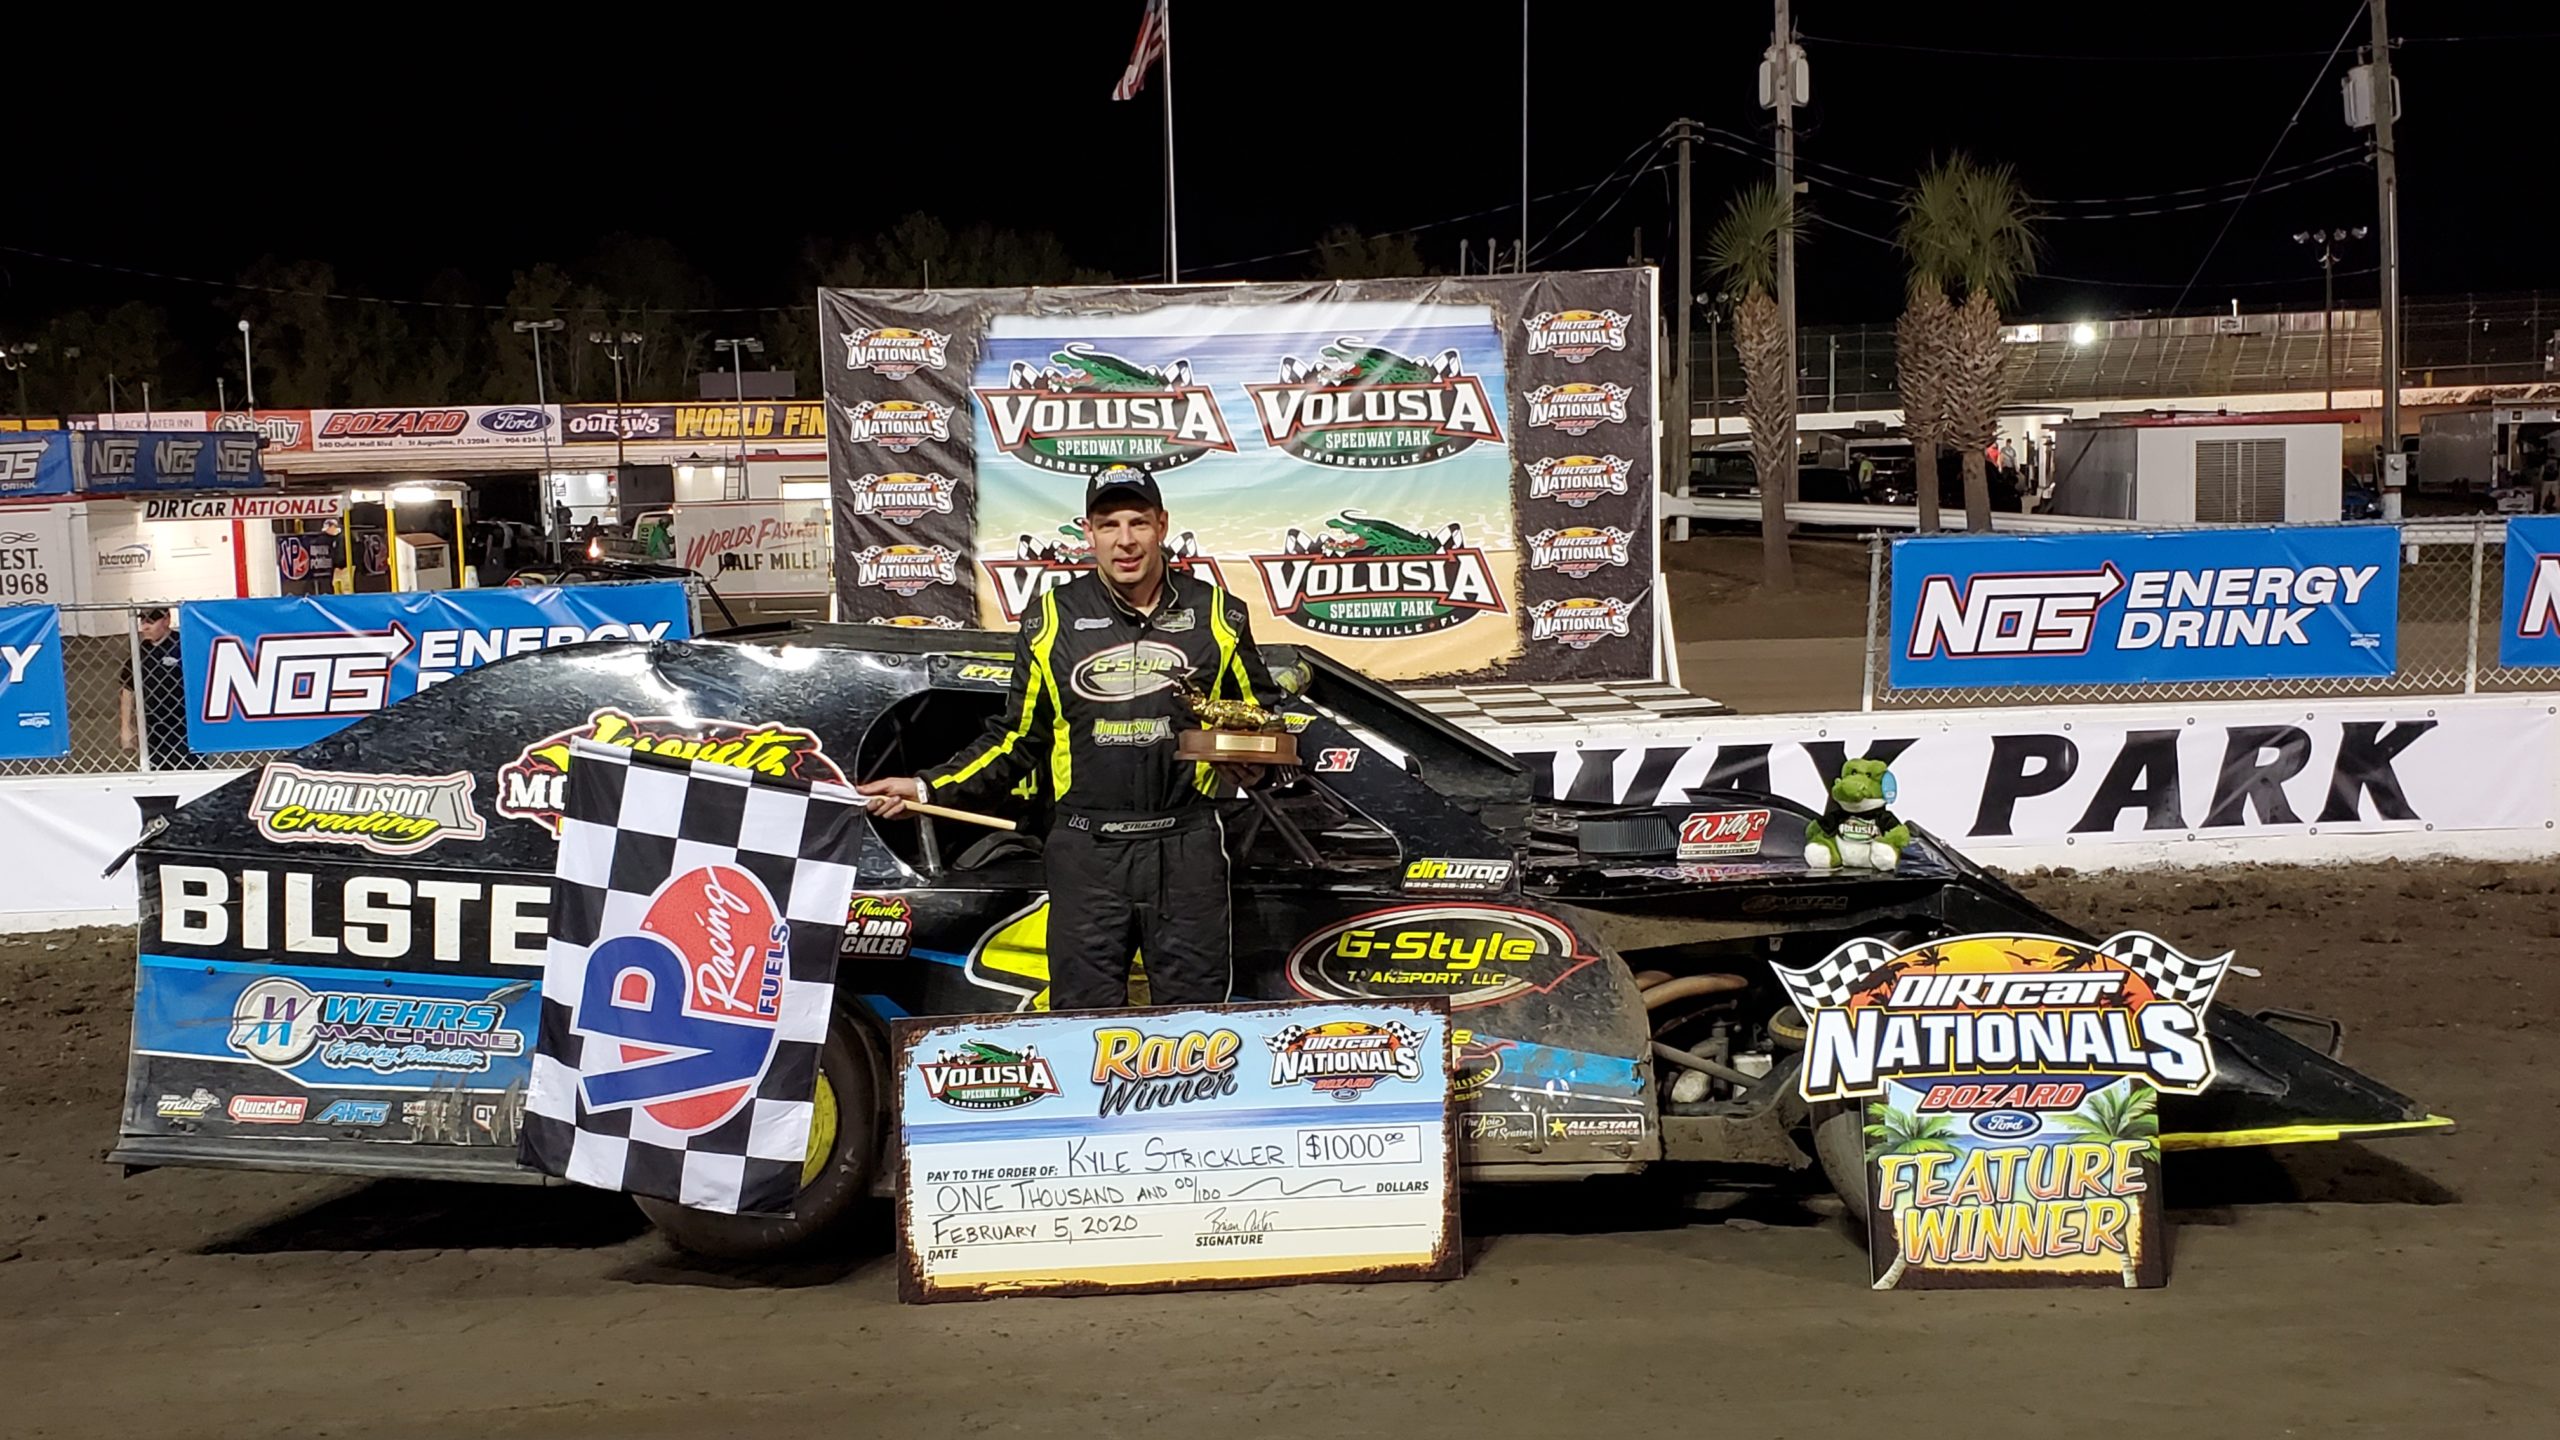 Kyle strickler owns second night of th nationals â racing